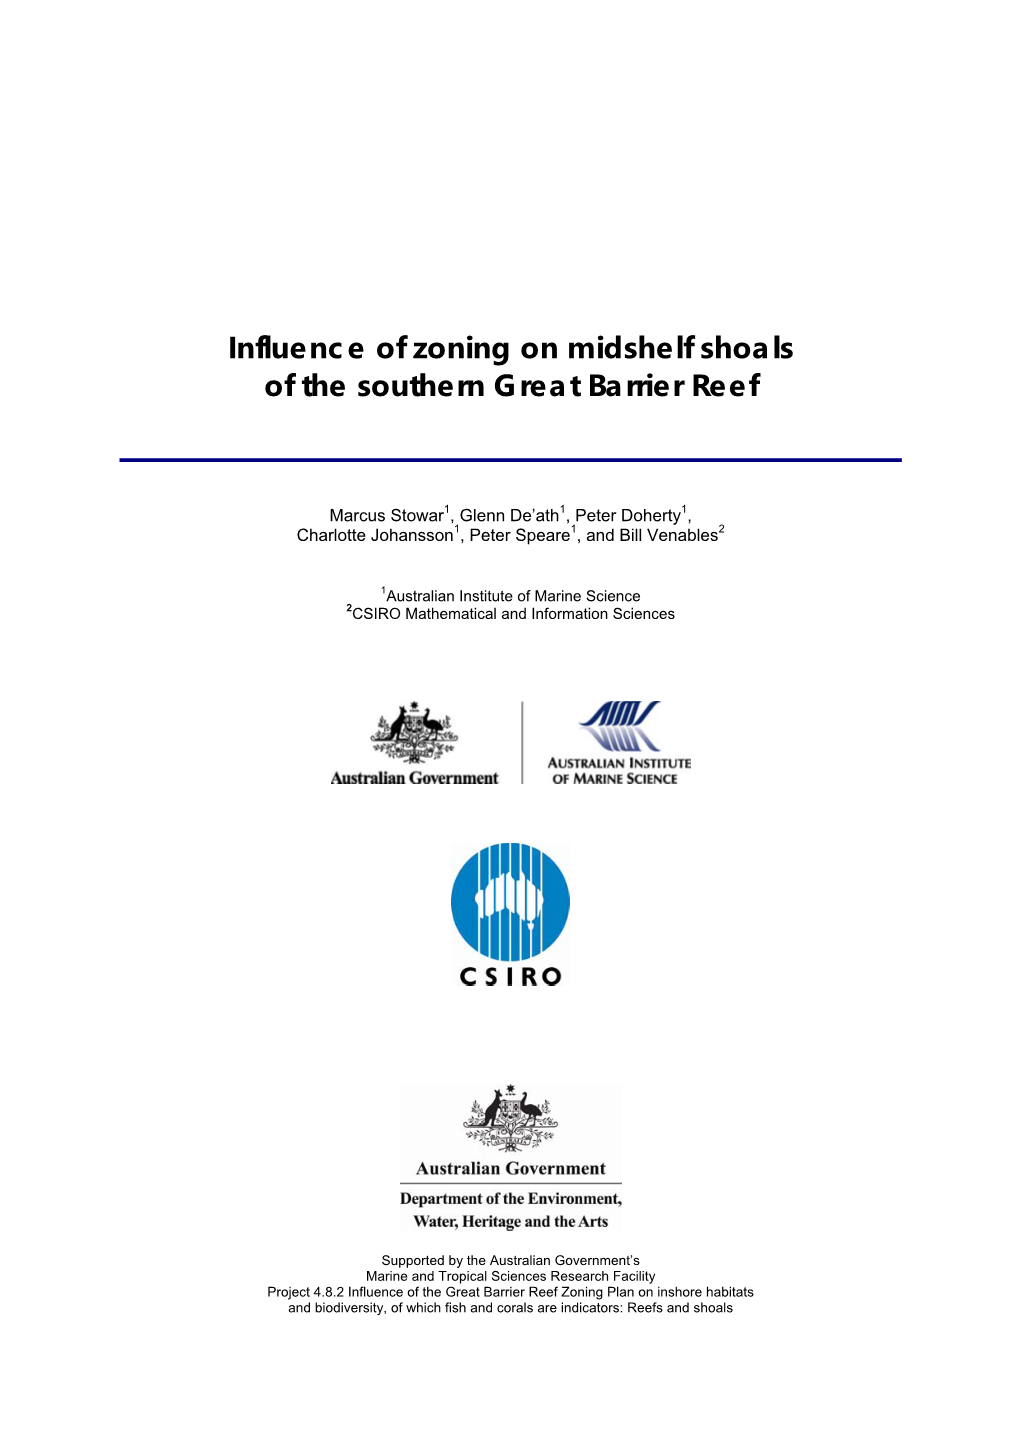 Influence of Zoning on Midshelf Shoals of the Southern Great Barrier Reef